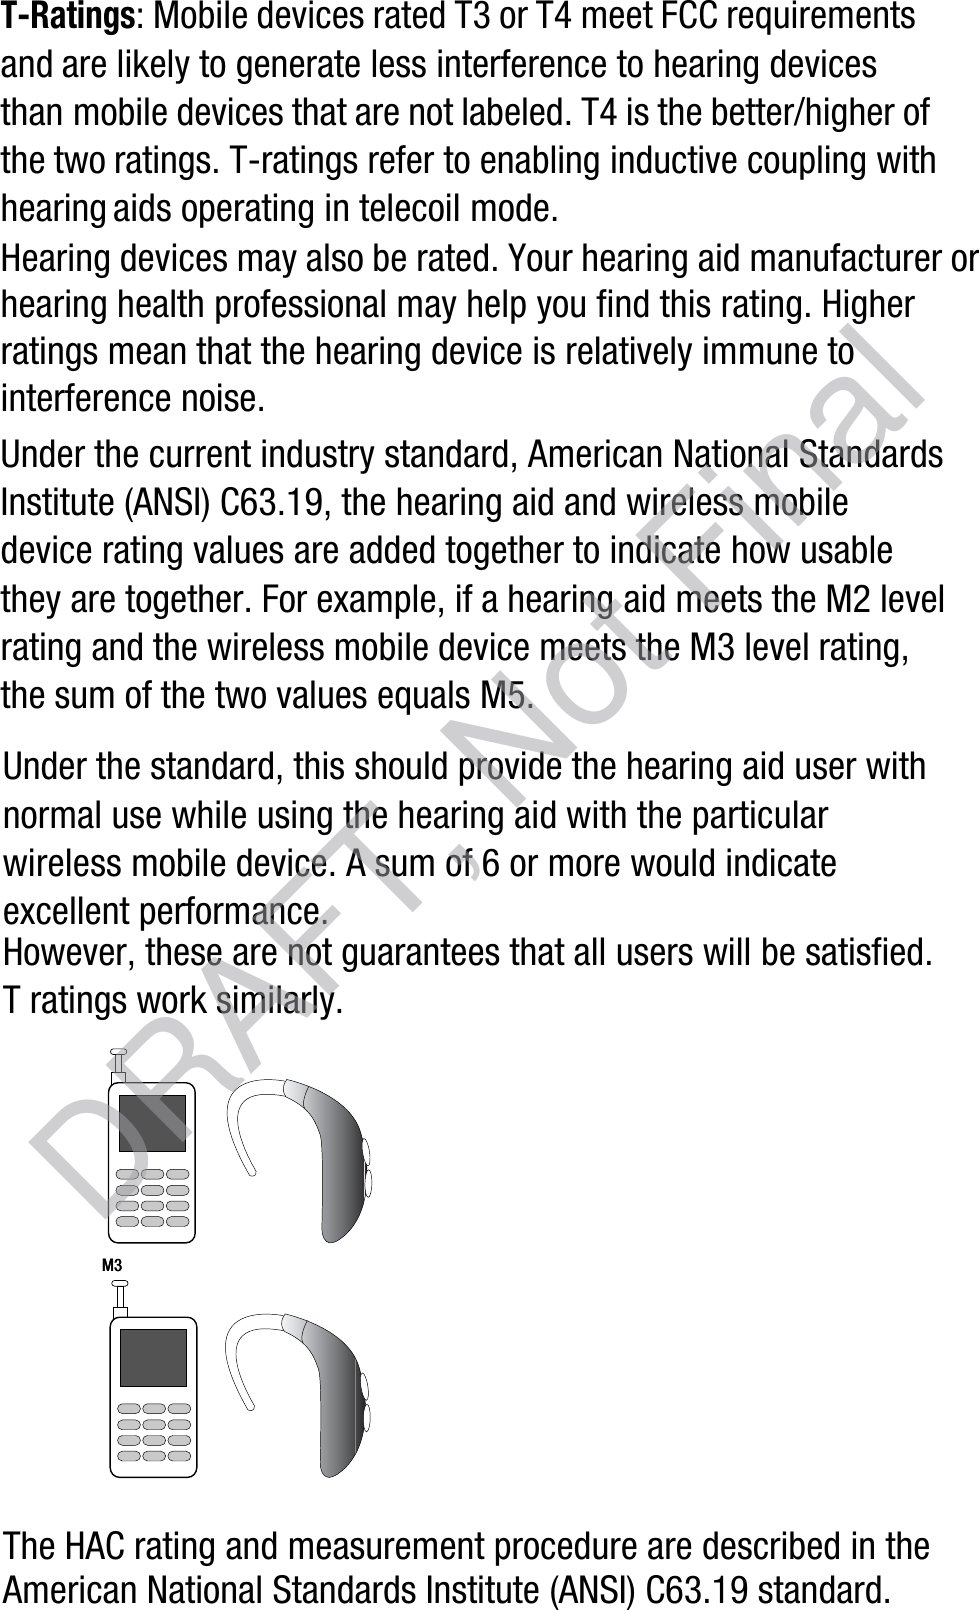 T-Ratings: Mobile devices rated T3 or T4 meet FCC requirements and are likely to generate less interference to hearing devices than mobile devices that are not labeled. T4 is the better/higher of the two ratings. T-ratings refer to enabling inductive coupling with hearing aids operating in telecoil mode.Hearing devices may also be rated. Your hearing aid manufacturer or hearing health professional may help you find this rating. Higher ratings mean that the hearing device is relatively immune to interference noise. Under the current industry standard, American National Standards Institute (ANSI) C63.19, the hearing aid and wireless mobile device rating values are added together to indicate how usable they are together. For example, if a hearing aid meets the M2 level rating and the wireless mobile device meets the M3 level rating, the sum of the two values equals M5. Under the standard, this should provide the hearing aid user with normal use while using the hearing aid with the particular wireless mobile device. A sum of 6 or more would indicate excellent performance.  However, these are not guarantees that all users will be satisfied. T ratings work similarly.The HAC rating and measurement procedure are described in the American National Standards Institute (ANSI) C63.19 standard.M3M3       DRAFT, Not Final